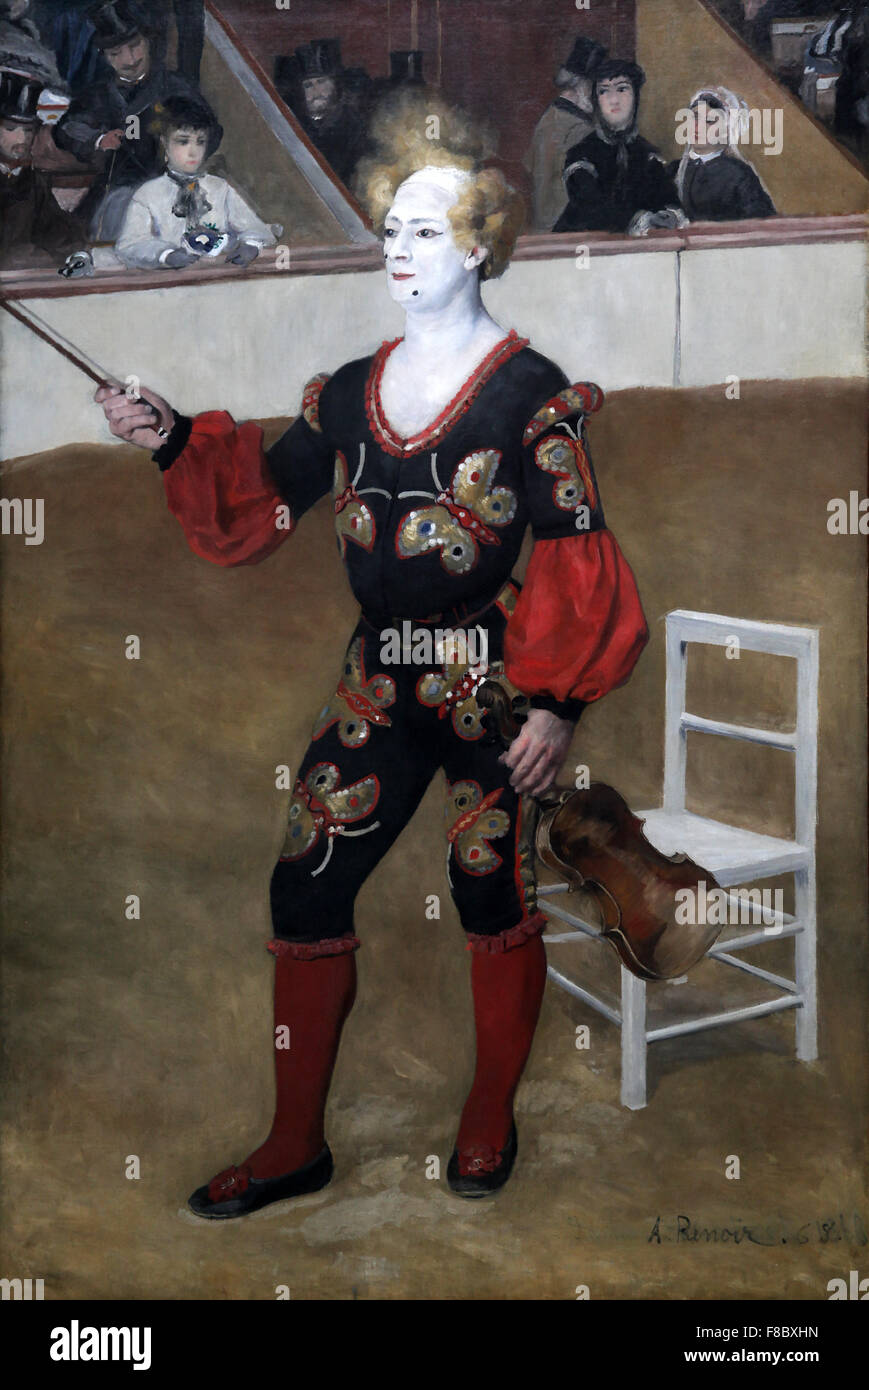 The Clown 1868 by french painter Auguste Renoir Stock Photo